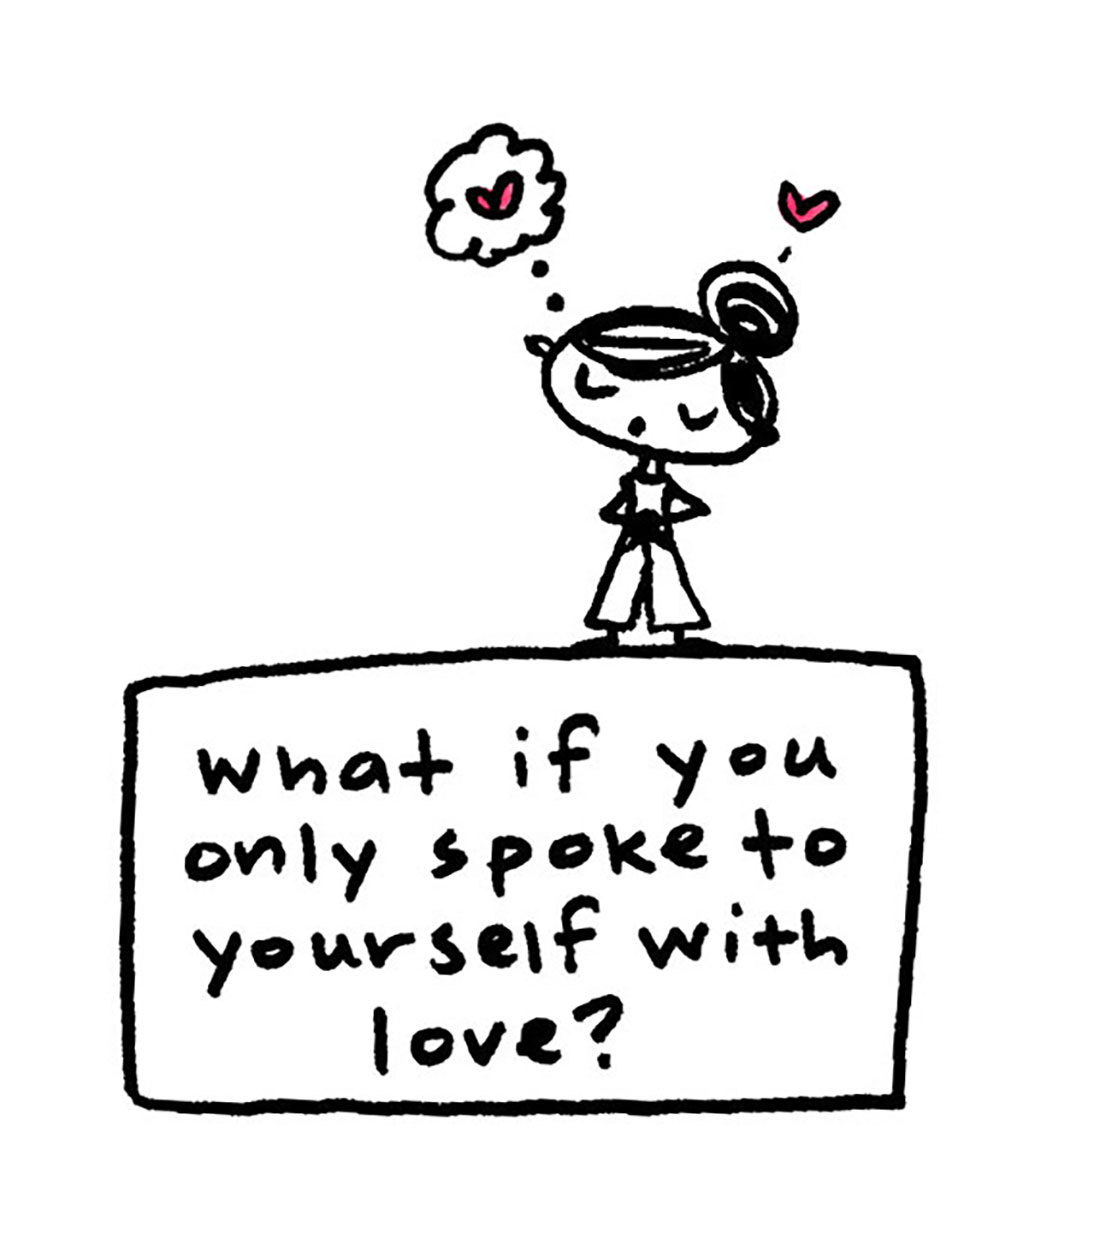 what if you only spoke to yourself with love.